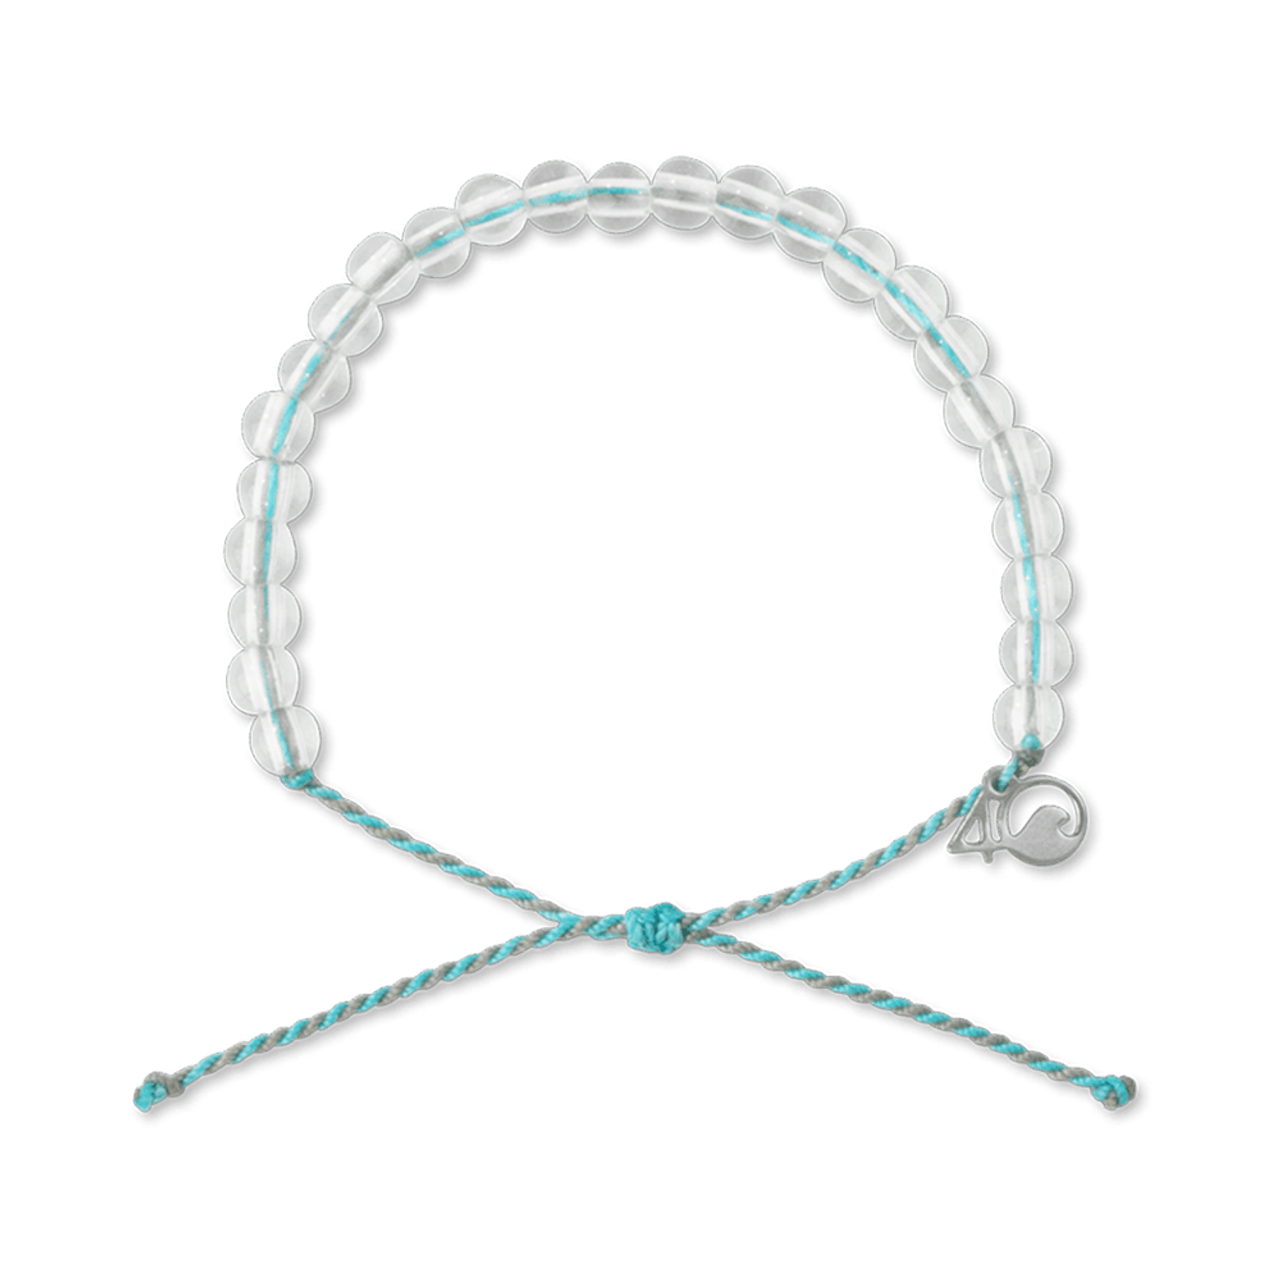 4ocean | Shop Eco-Friendly Bracelets Made from Recycled Materials – tagged  